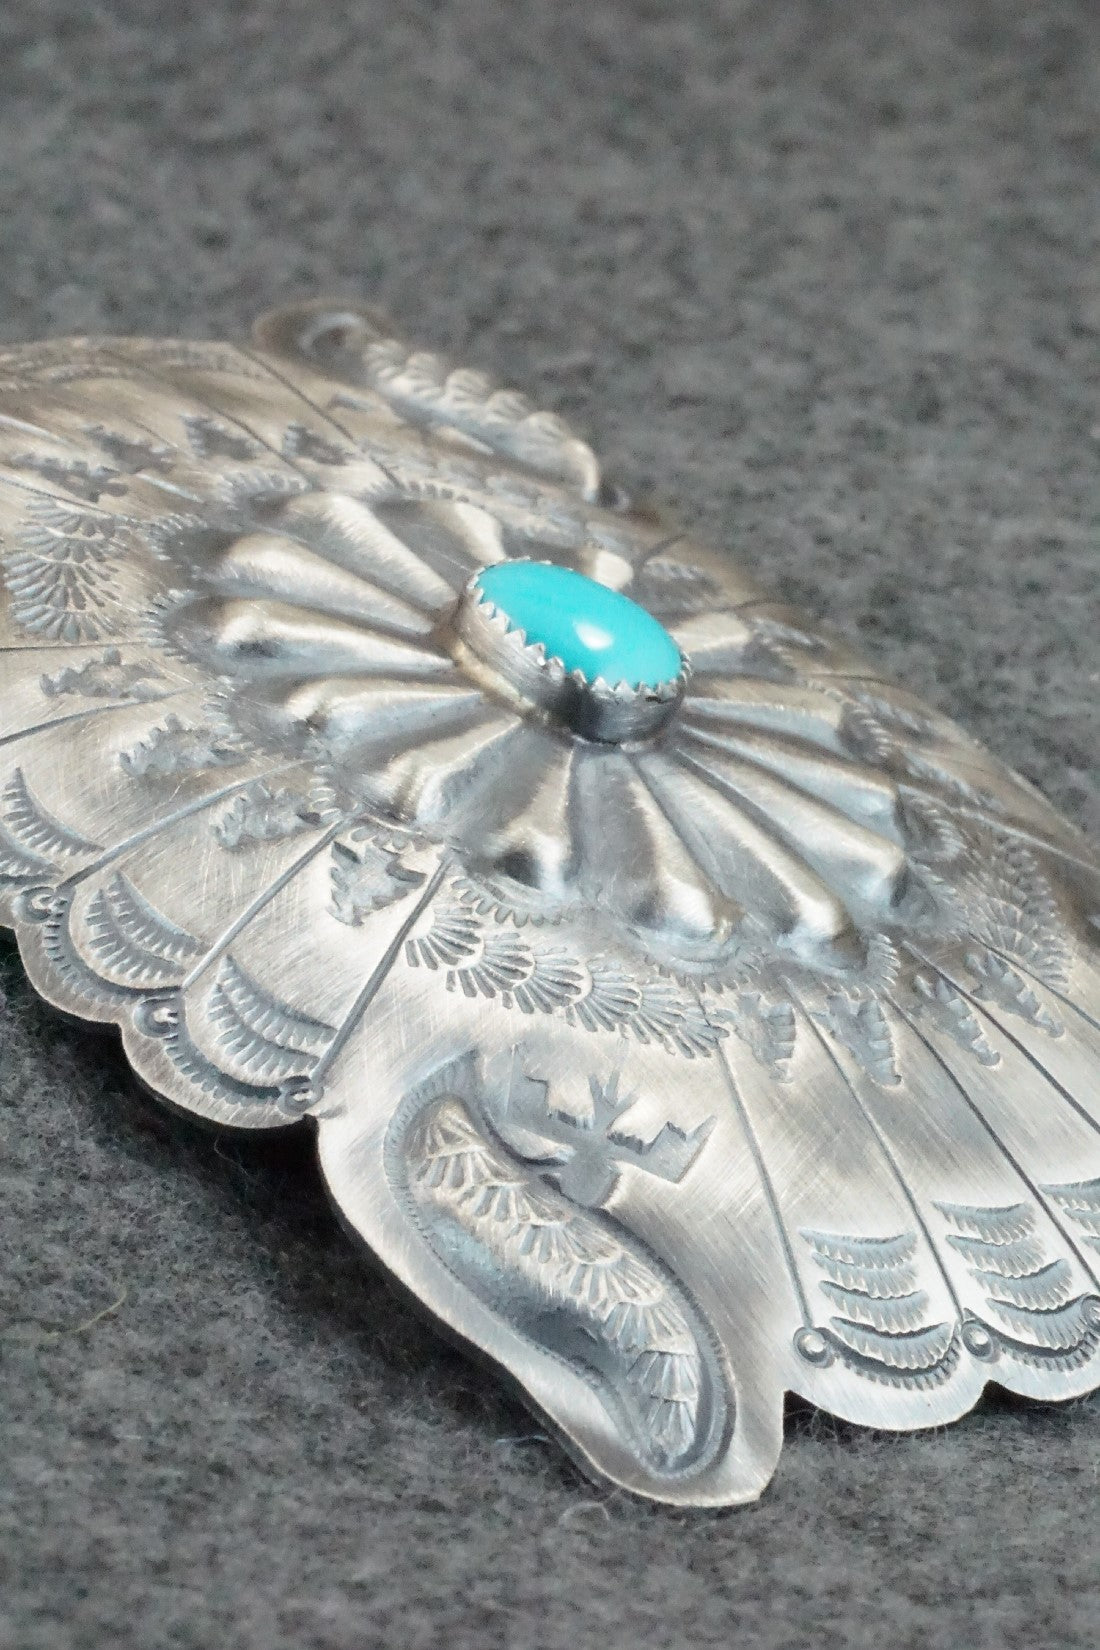 Turquoise & Sterling Silver Belt Buckle - Dale Morgan